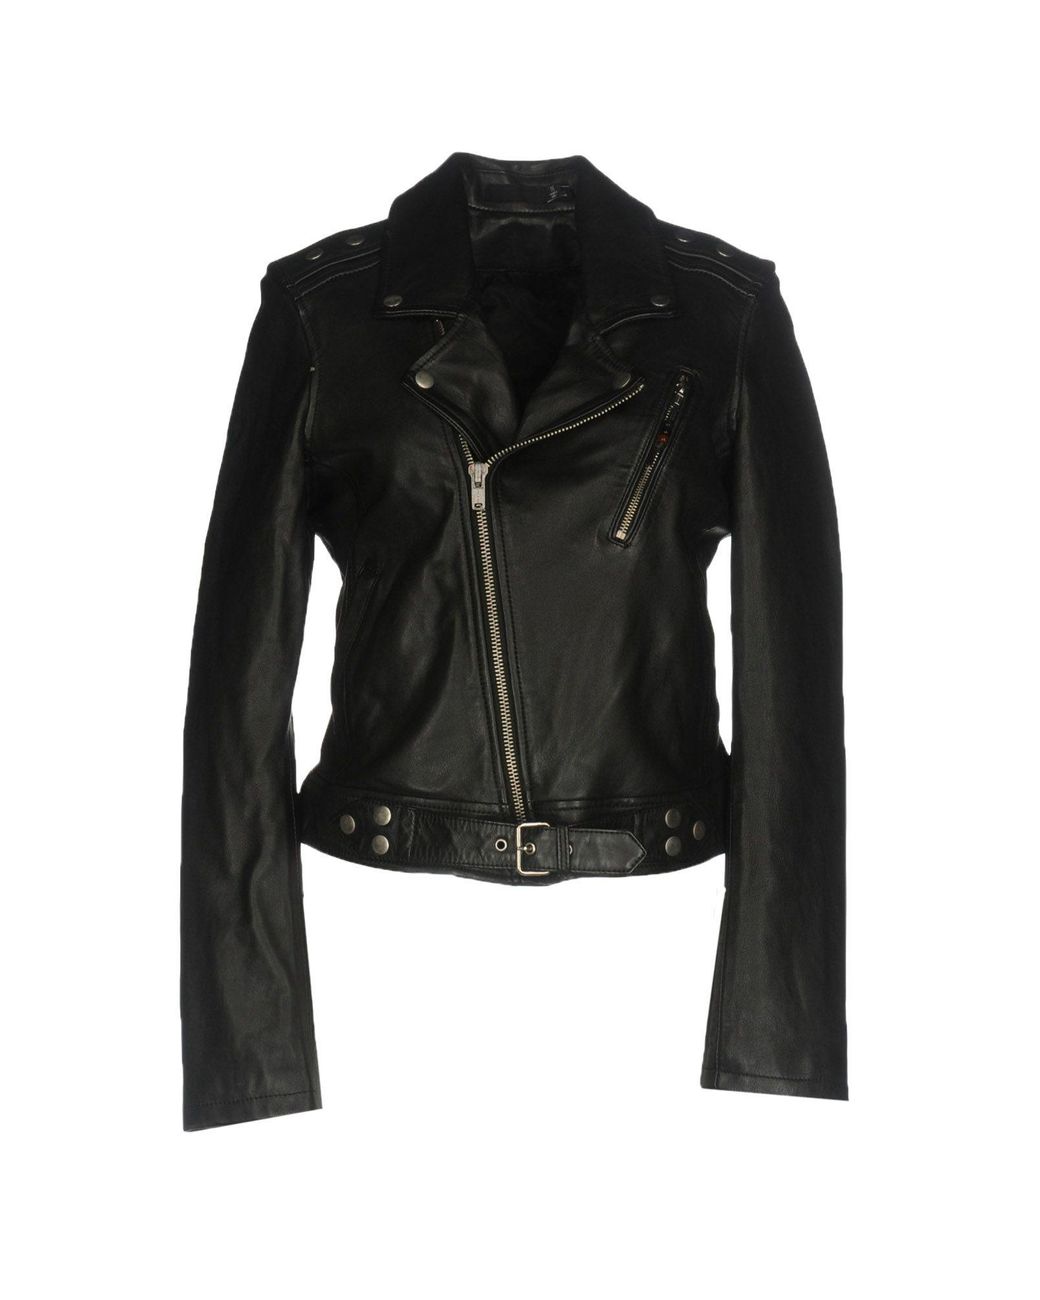 BLK DNM Leather Jacket in Black - Lyst